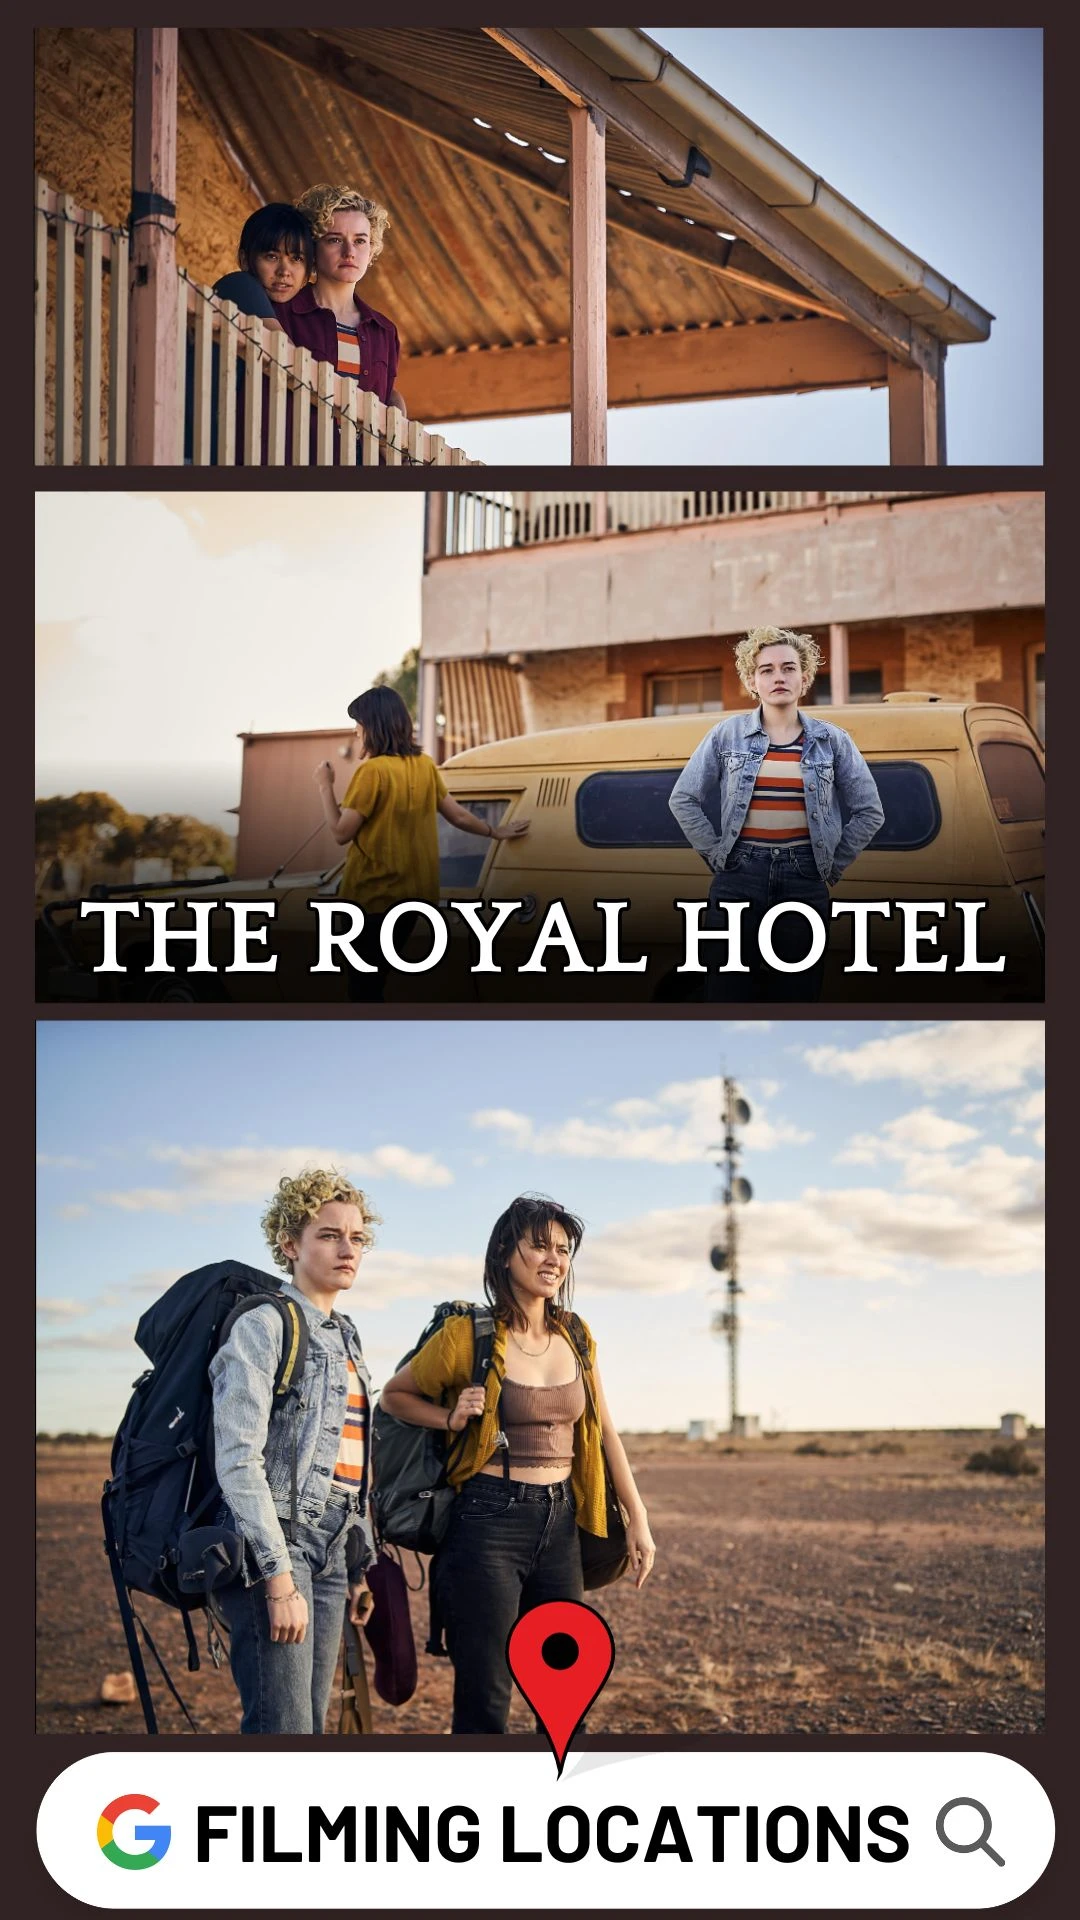 The Royal Hotel Filming Locations